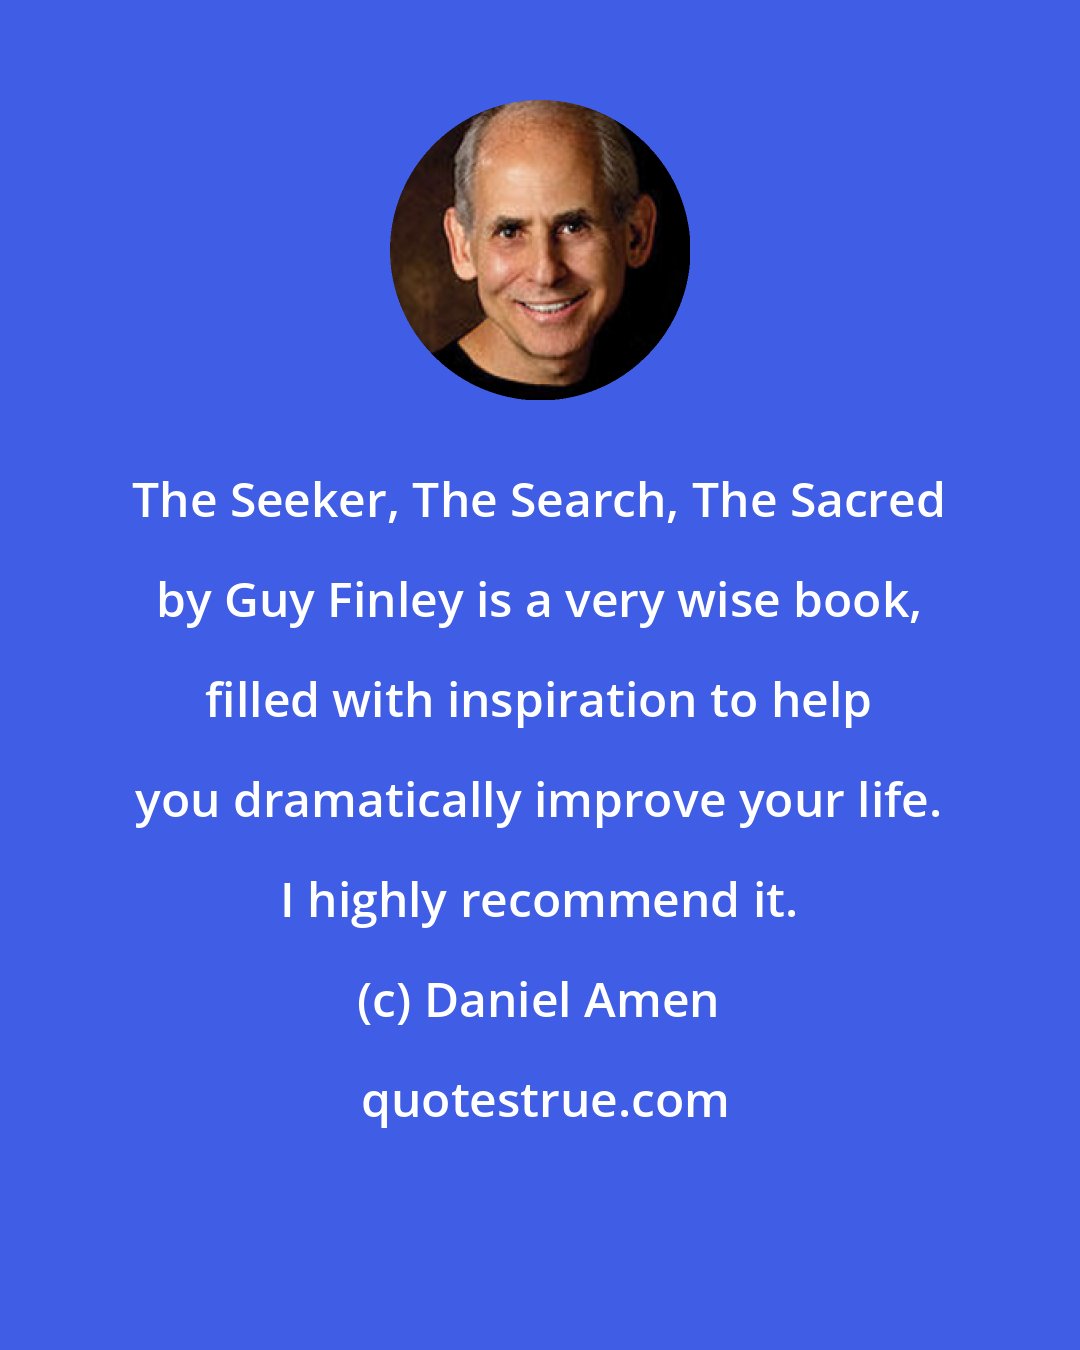 Daniel Amen: The Seeker, The Search, The Sacred by Guy Finley is a very wise book, filled with inspiration to help you dramatically improve your life. I highly recommend it.